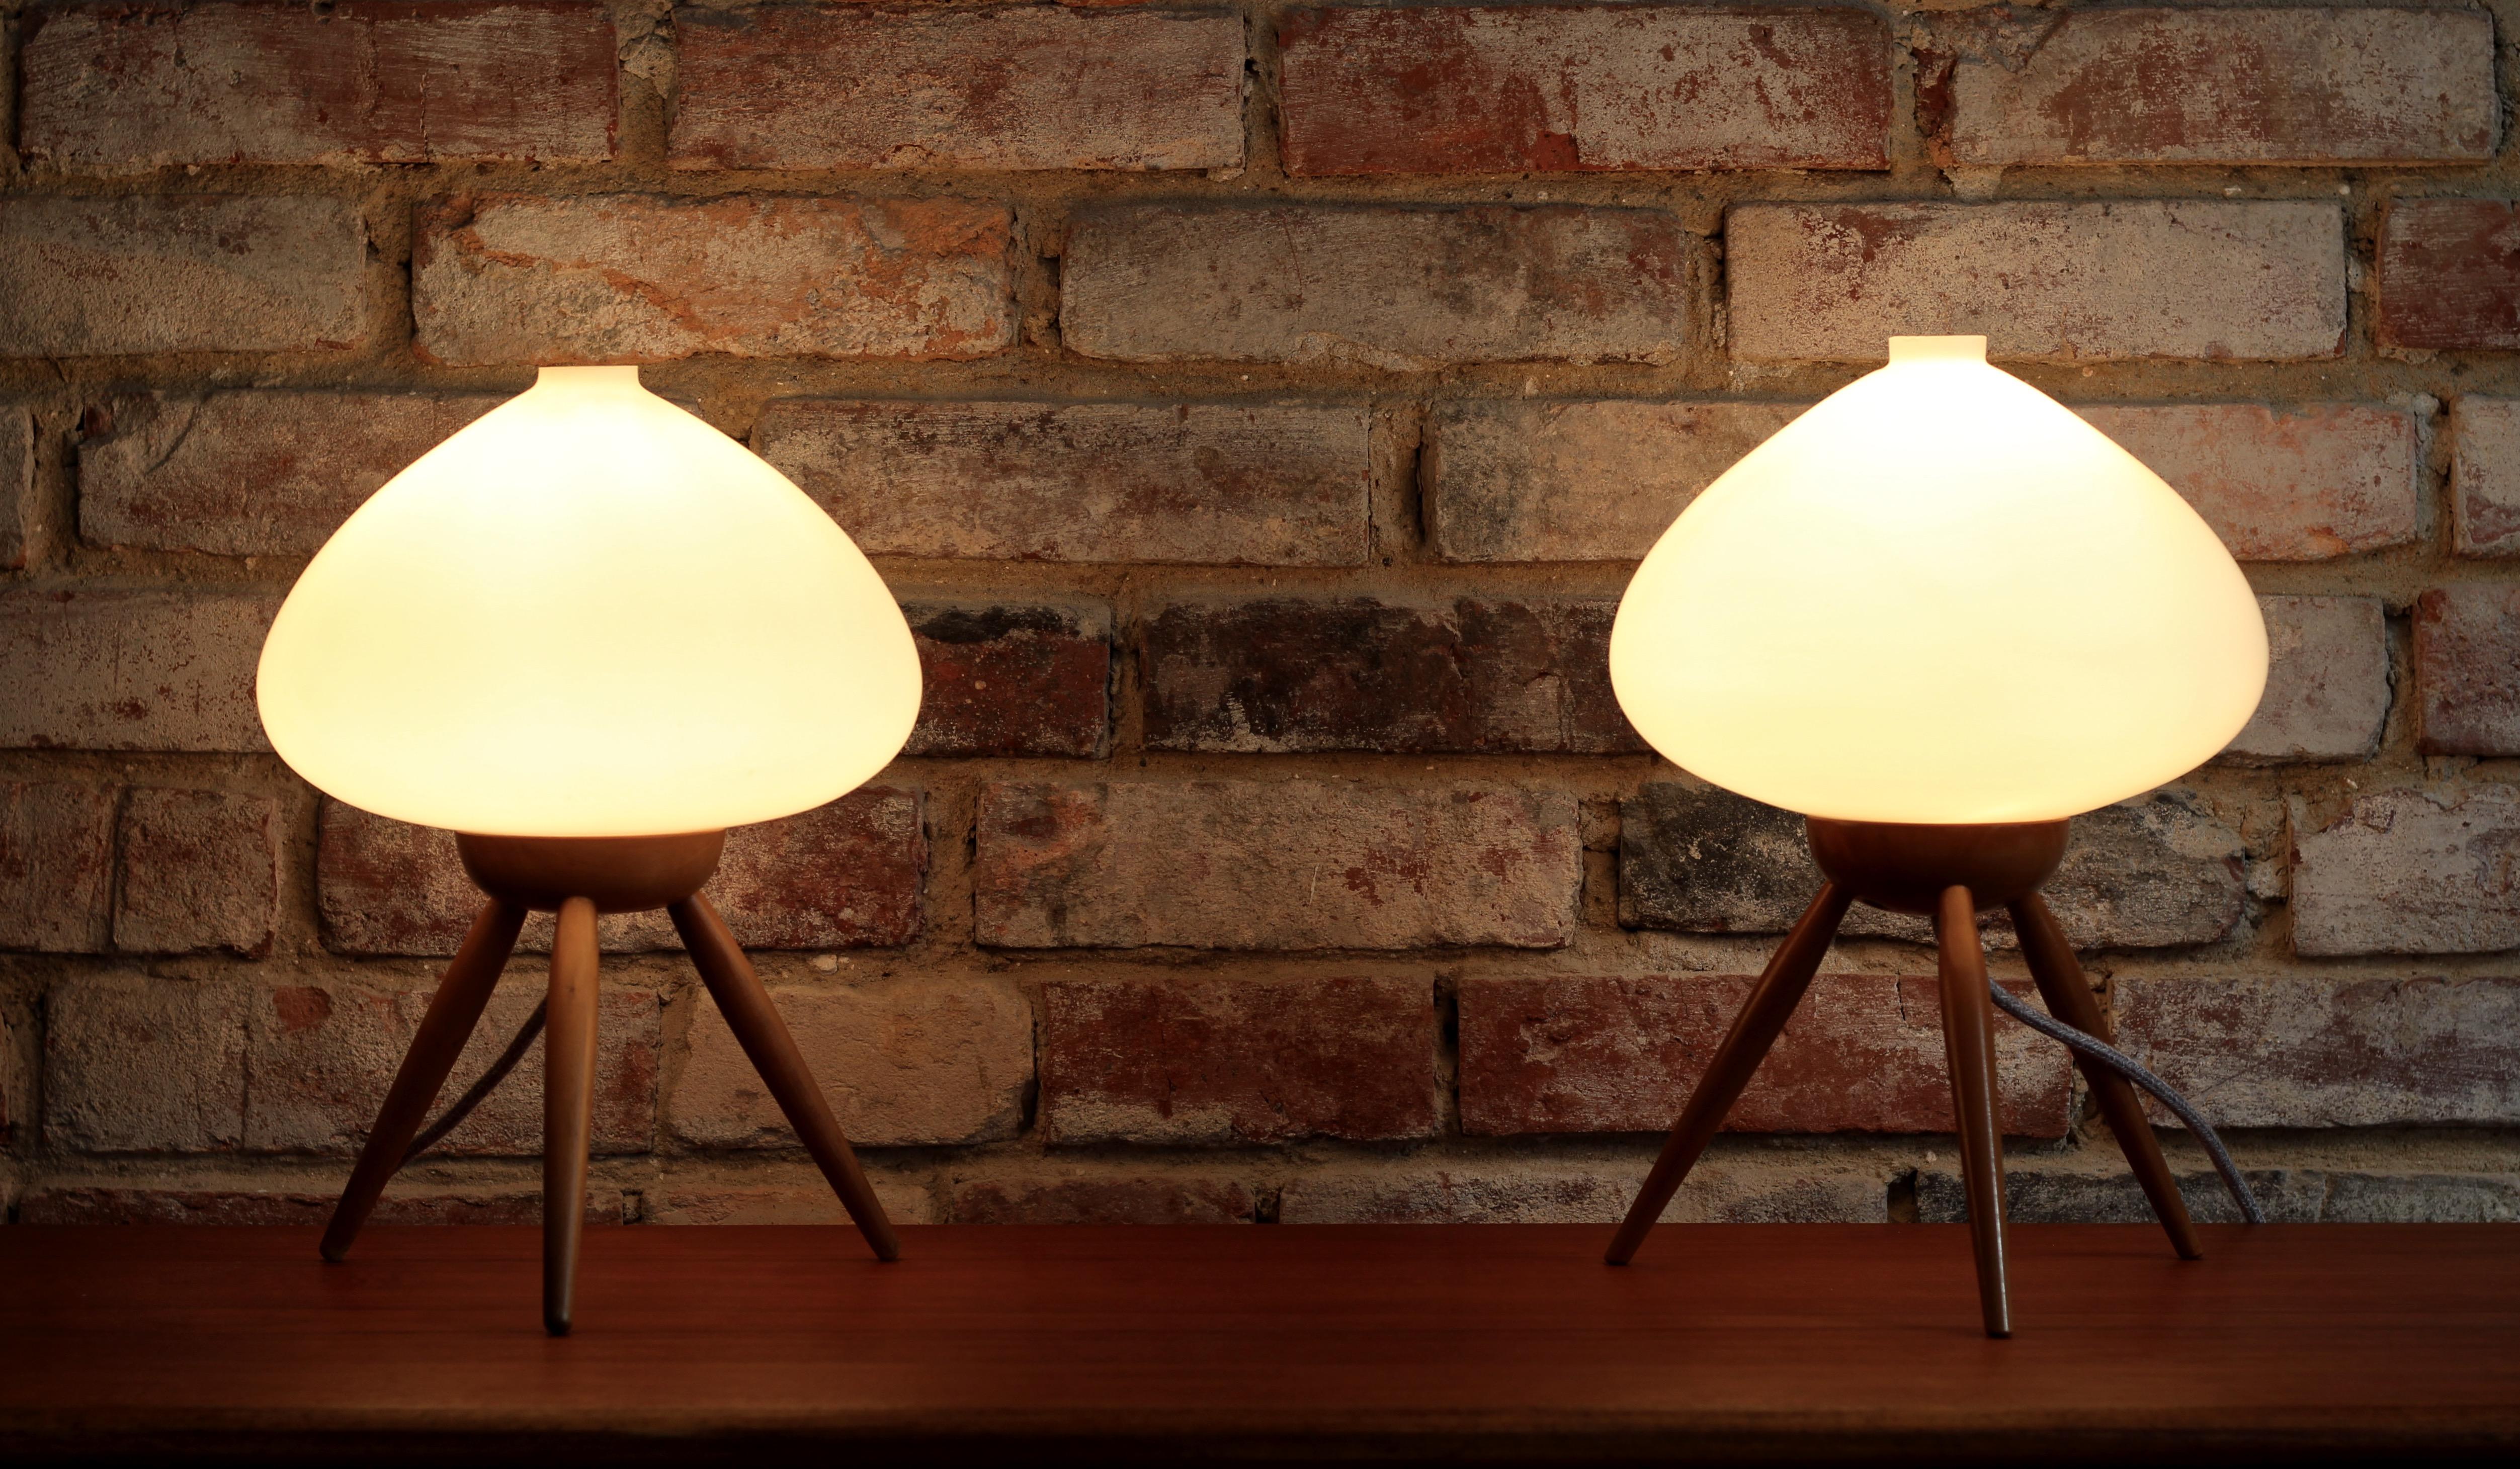 Extremely rare table lamps from Czechoslovakian company - ULUV (Ustredi lidove a umelecke vyroby) from 1960s. The lamps have beautifully shaped milk-white opaline glass lampshades set on a tripod wooden bases. They give warm delicate light creating